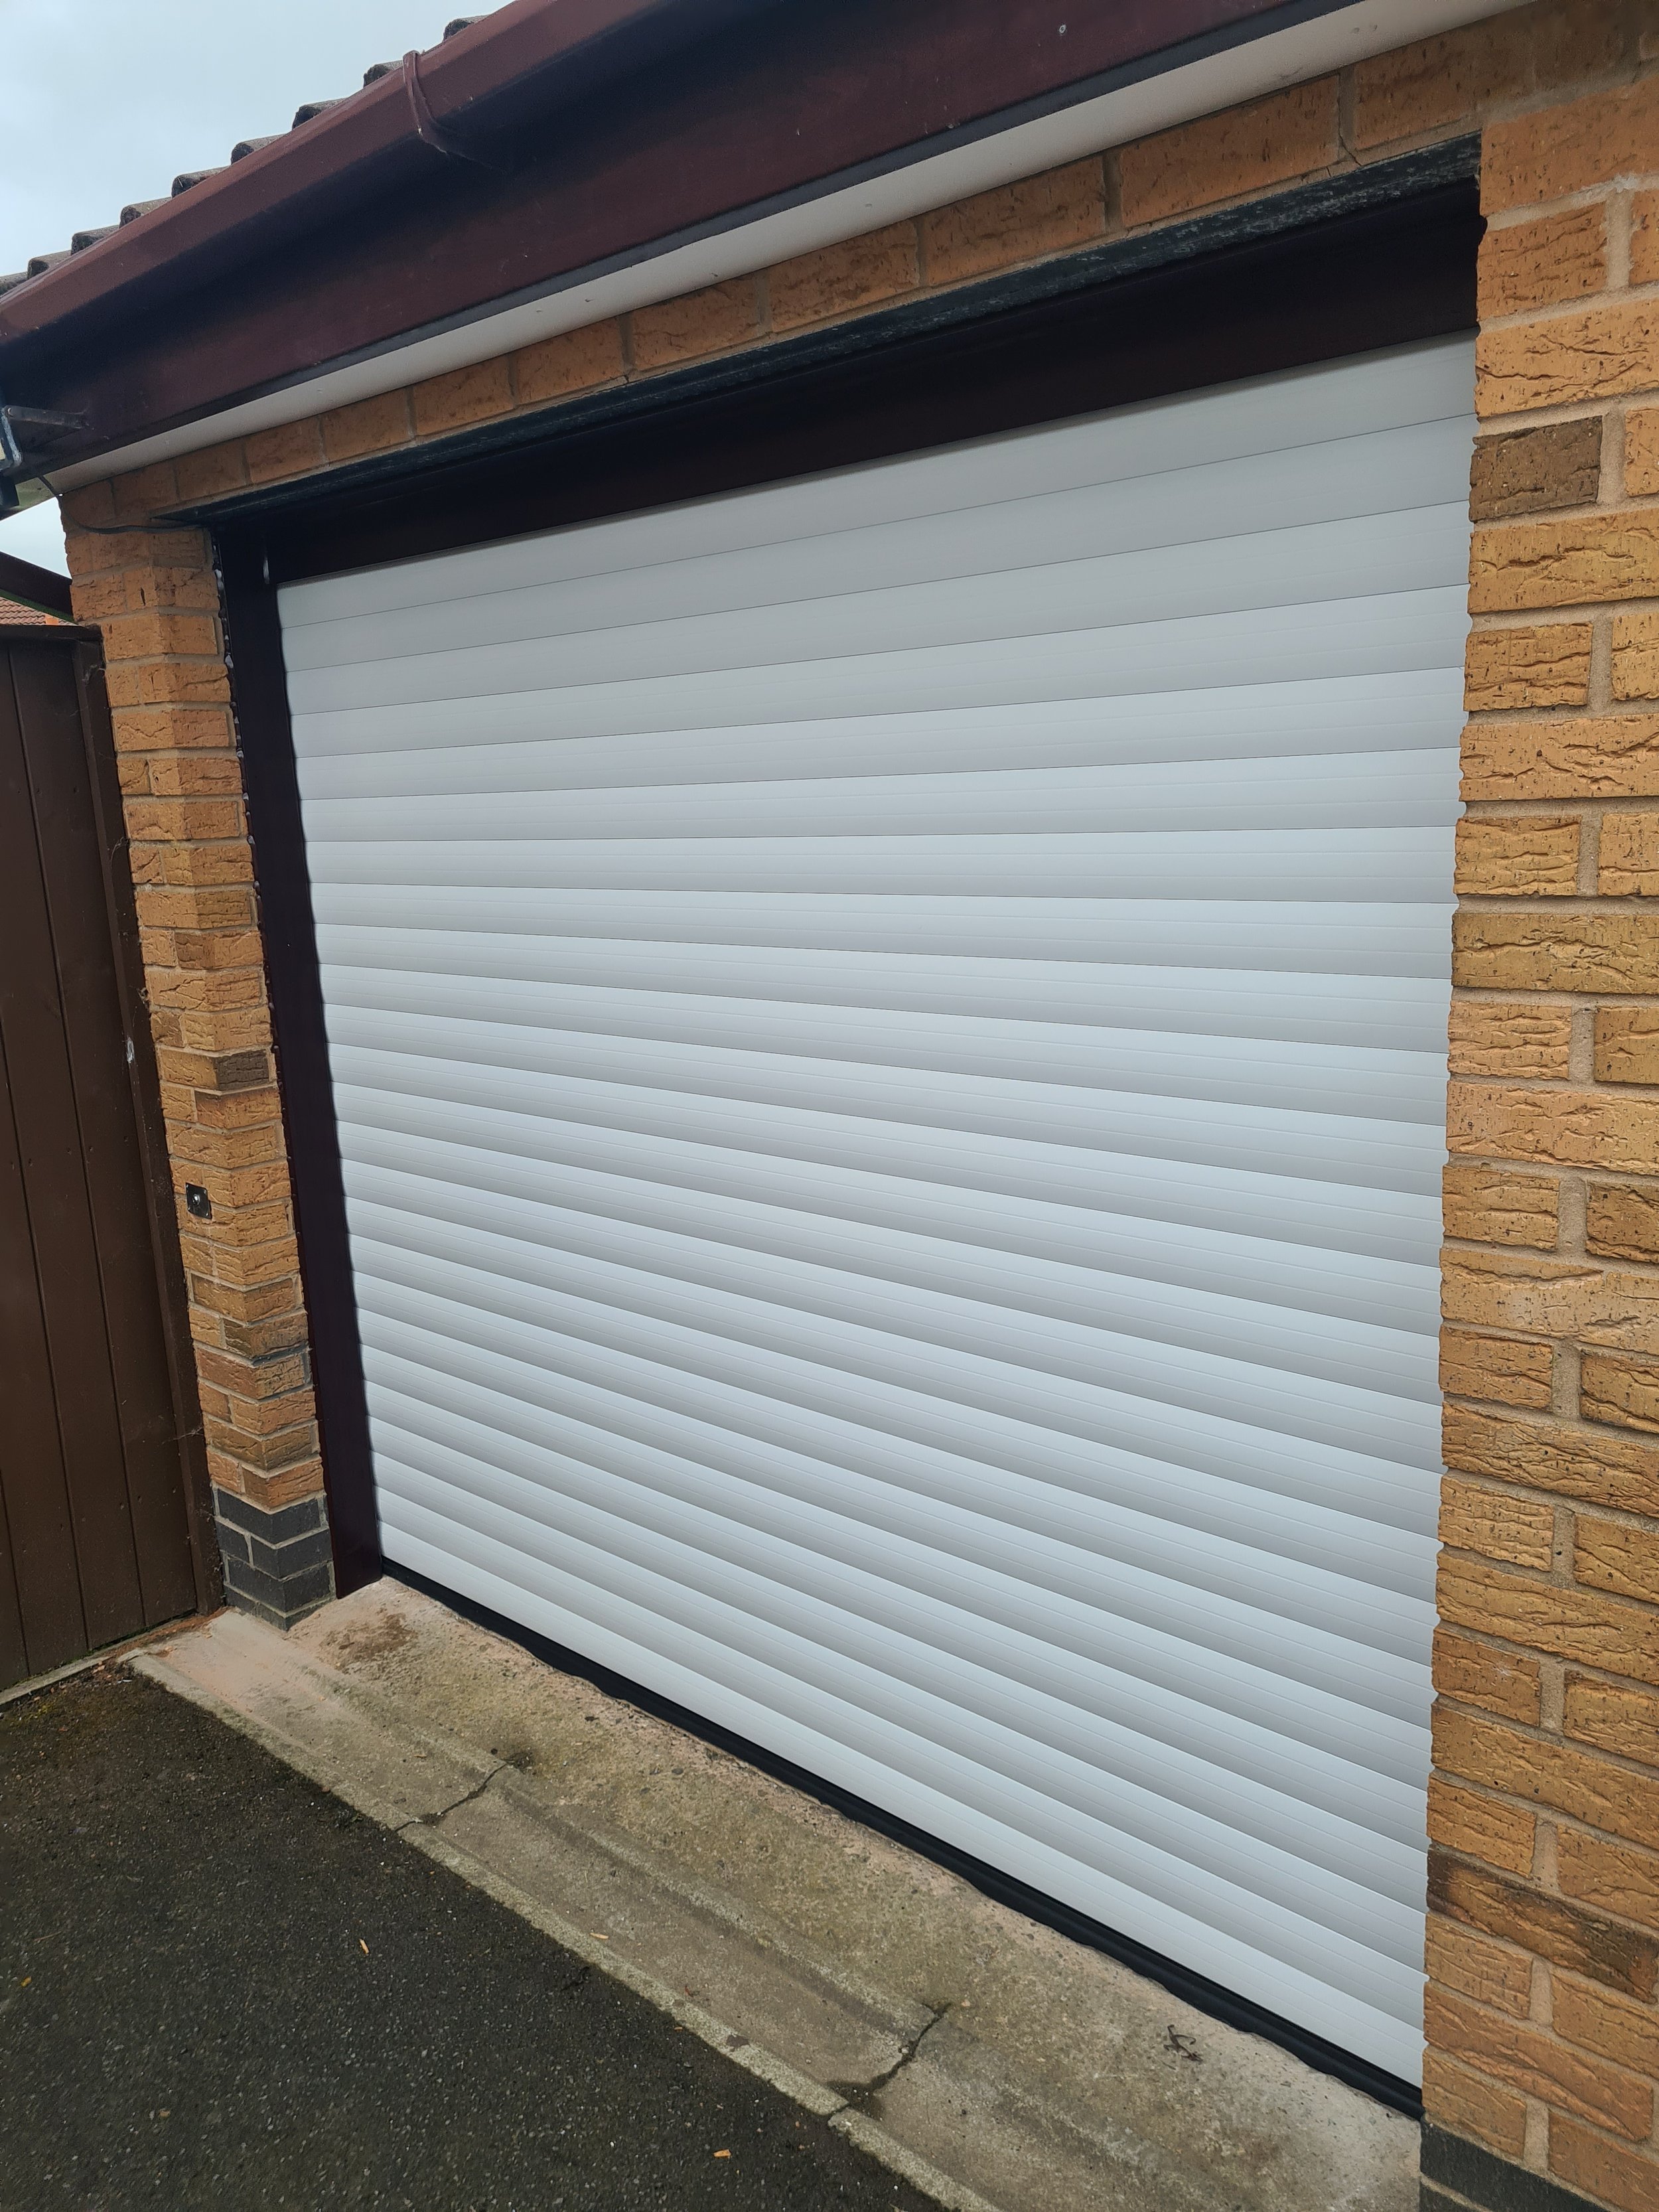 Uk Doors Midlands Classic 77m fully insulated roller garage door in smooth Ivory W/ Rosewood frame